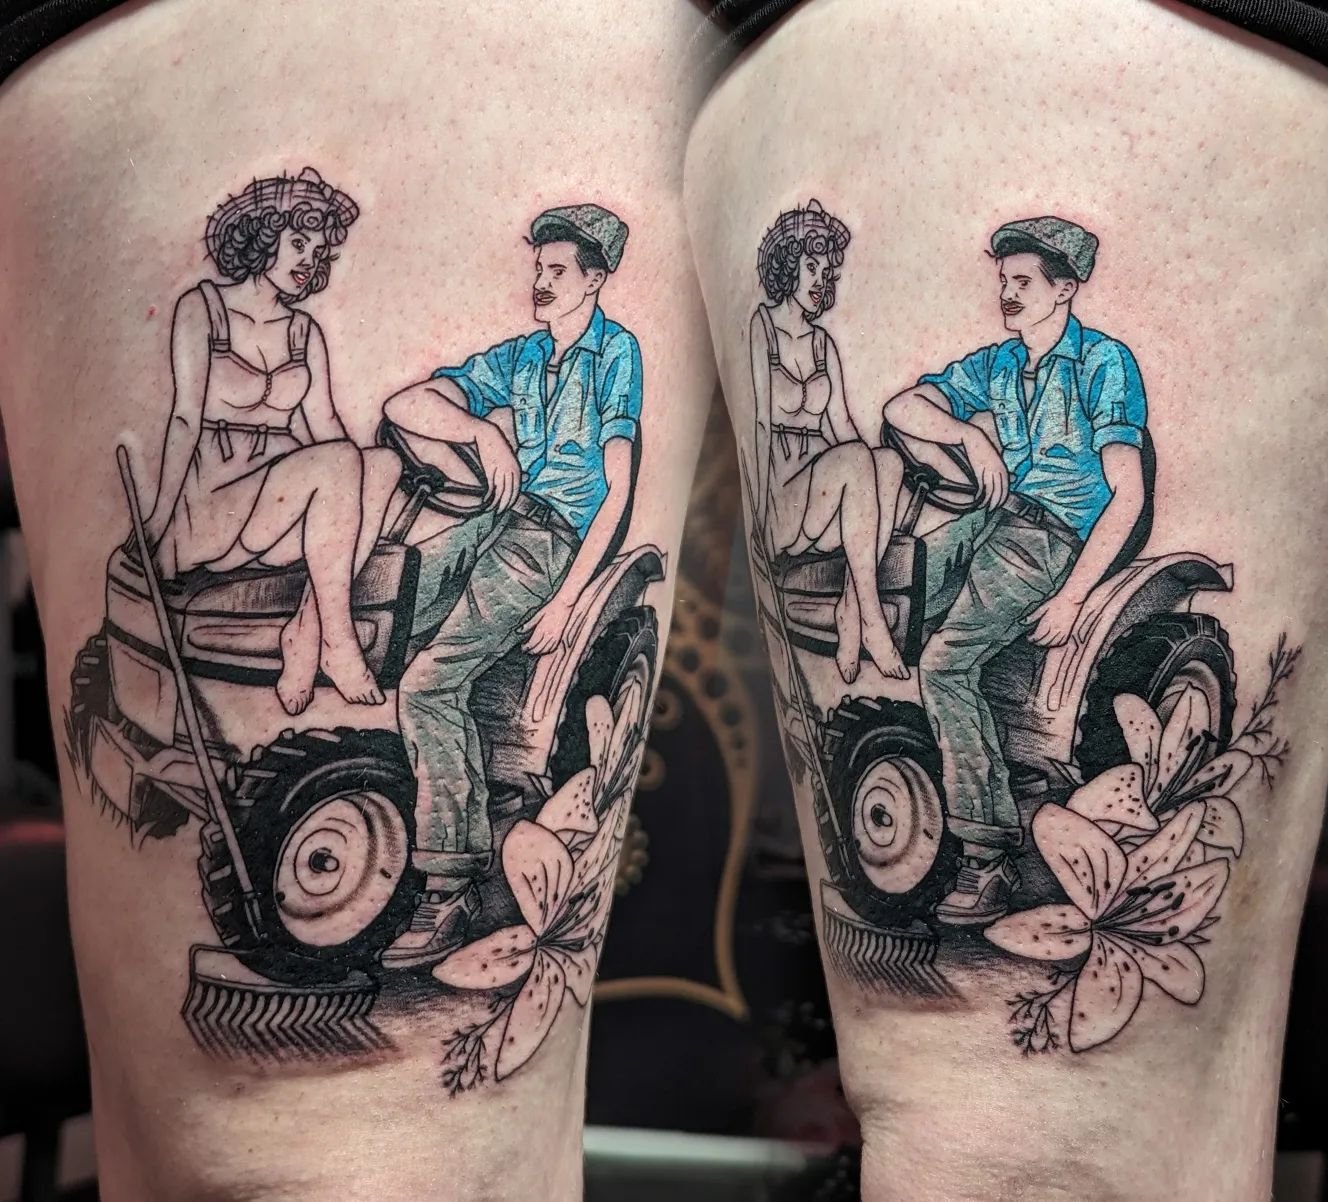 Good start to this piece today. Pinup style resembling her grandma and grandpa. @pepax.official @radiantcolorsink @allegoryink @ttechofficial @masttattoo.official @dragonhawkofficial @biotat_ @tattooproton @mapletattoosupply @eikondevice